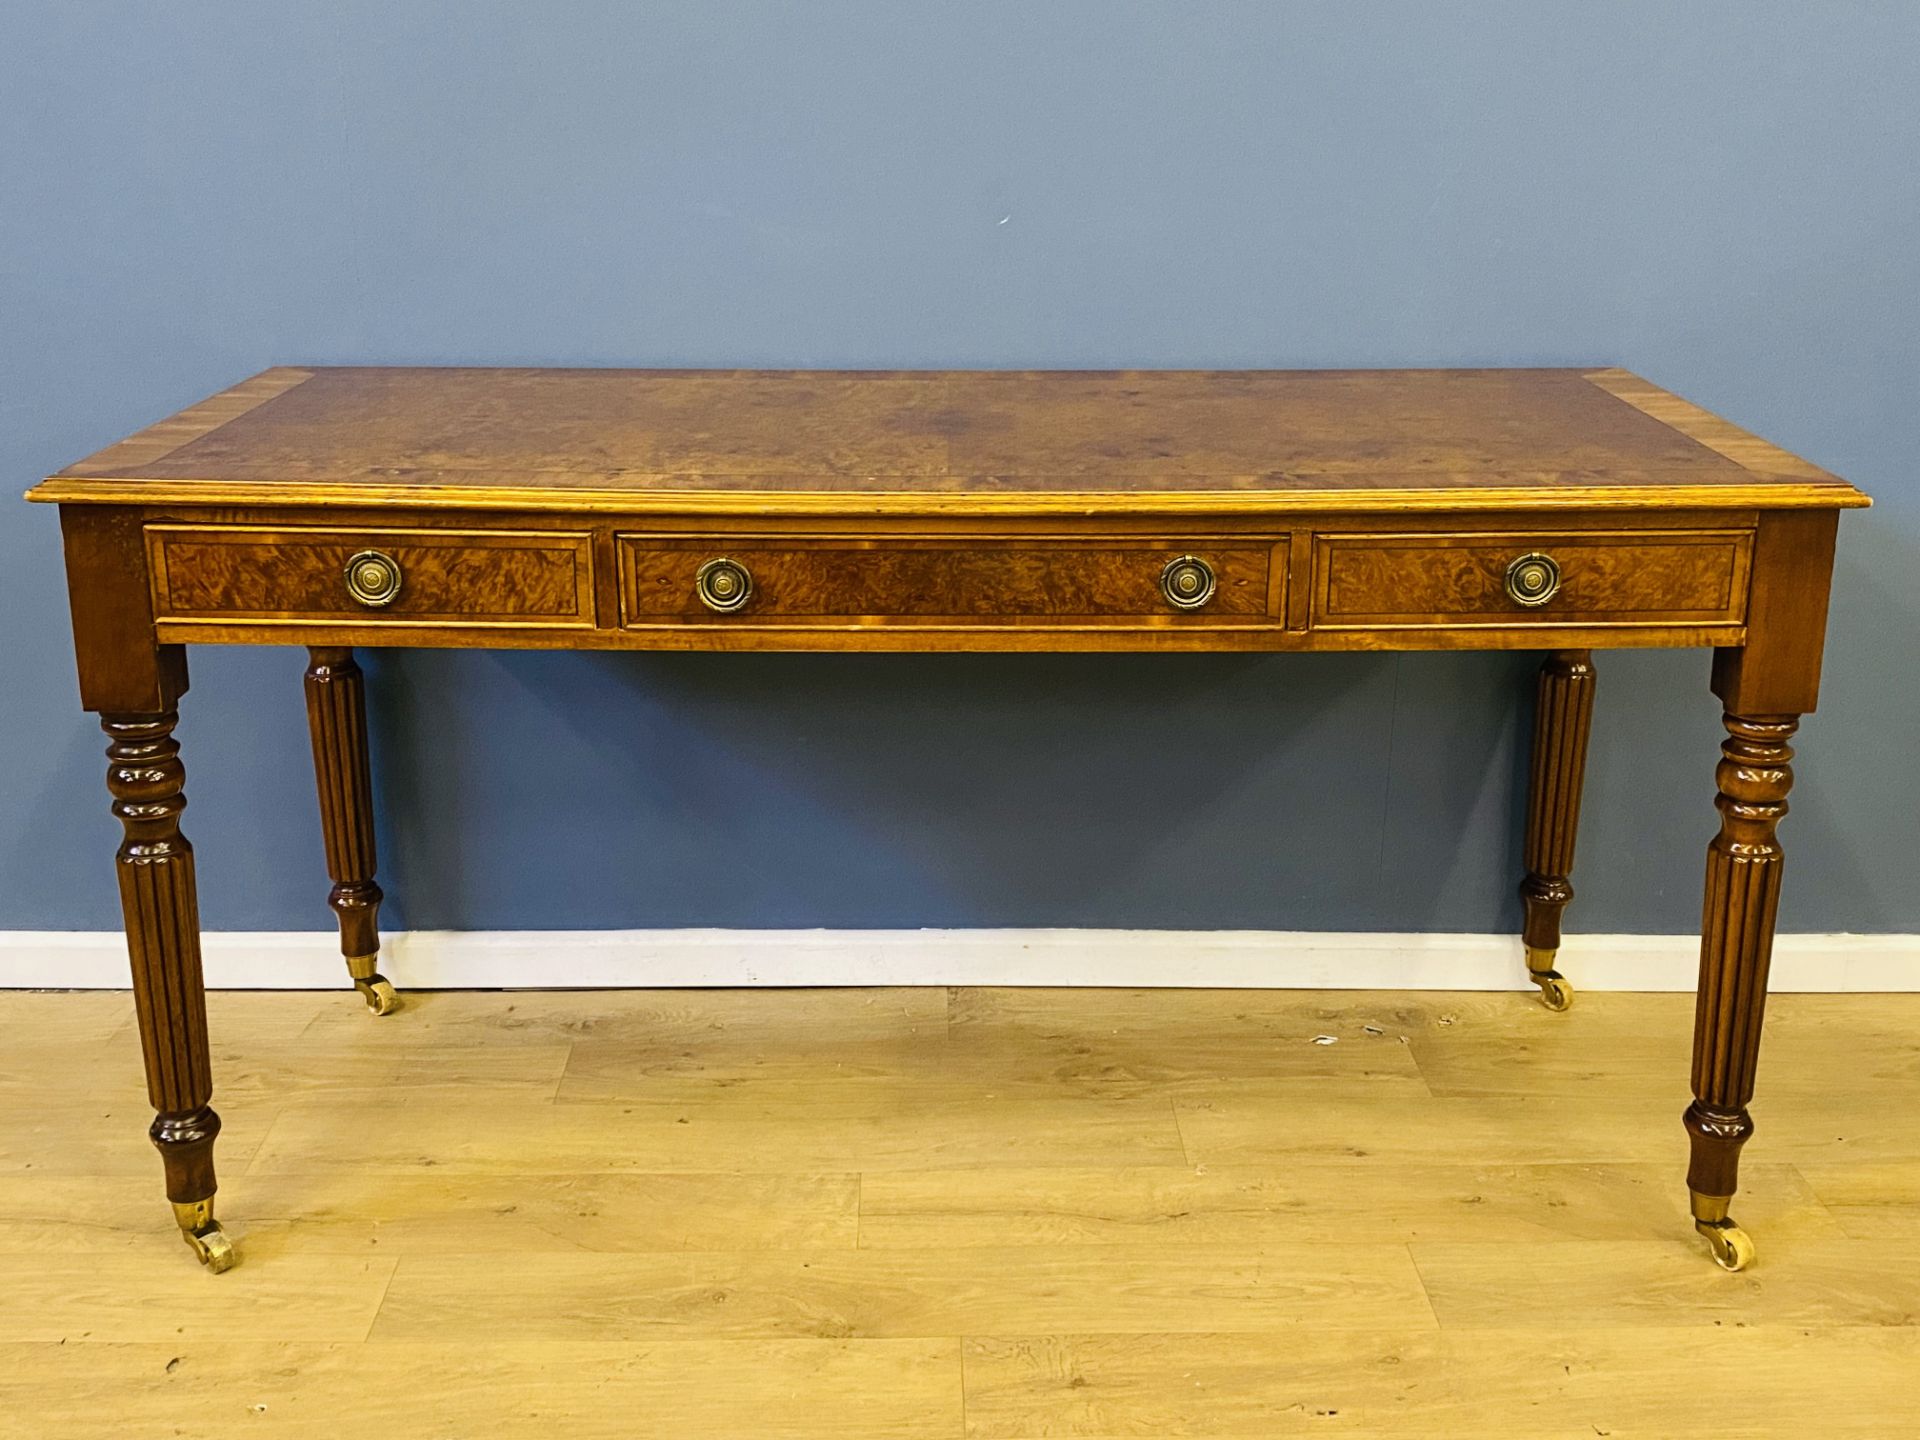 Reproduction burr walnut writing table - Image 2 of 7